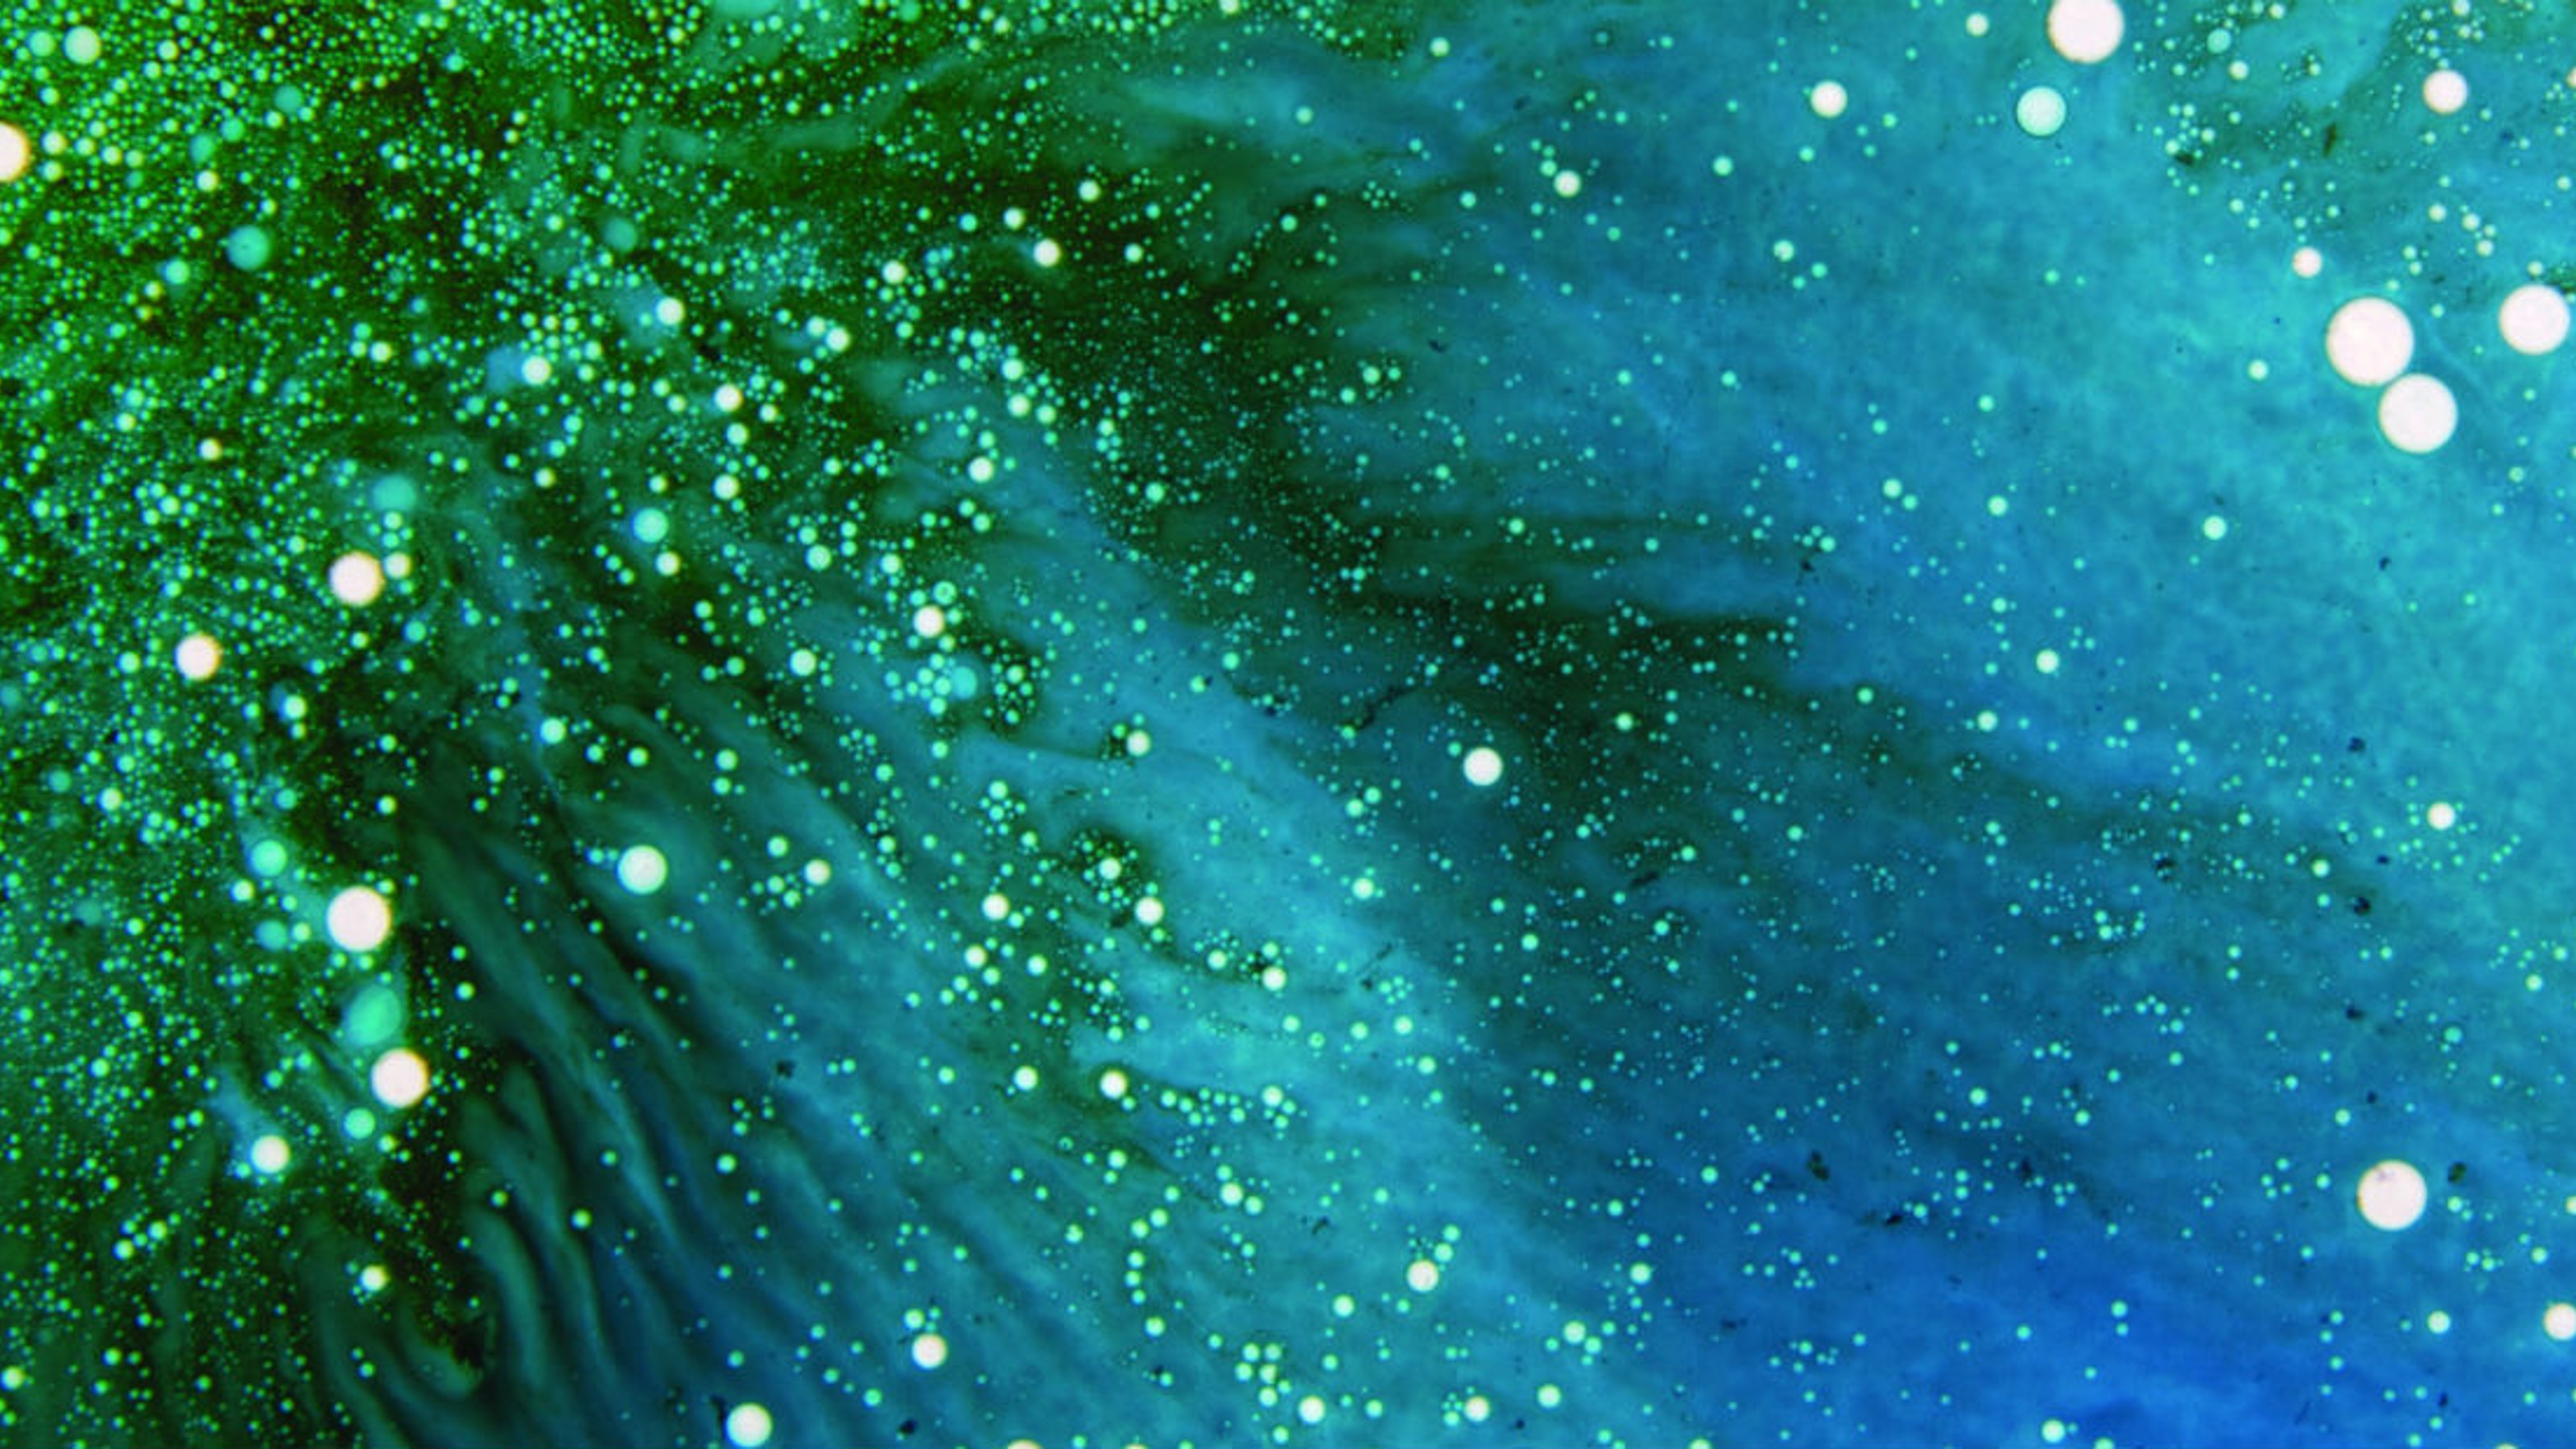 Microscopic or abstract view of green-blue organism with white dots